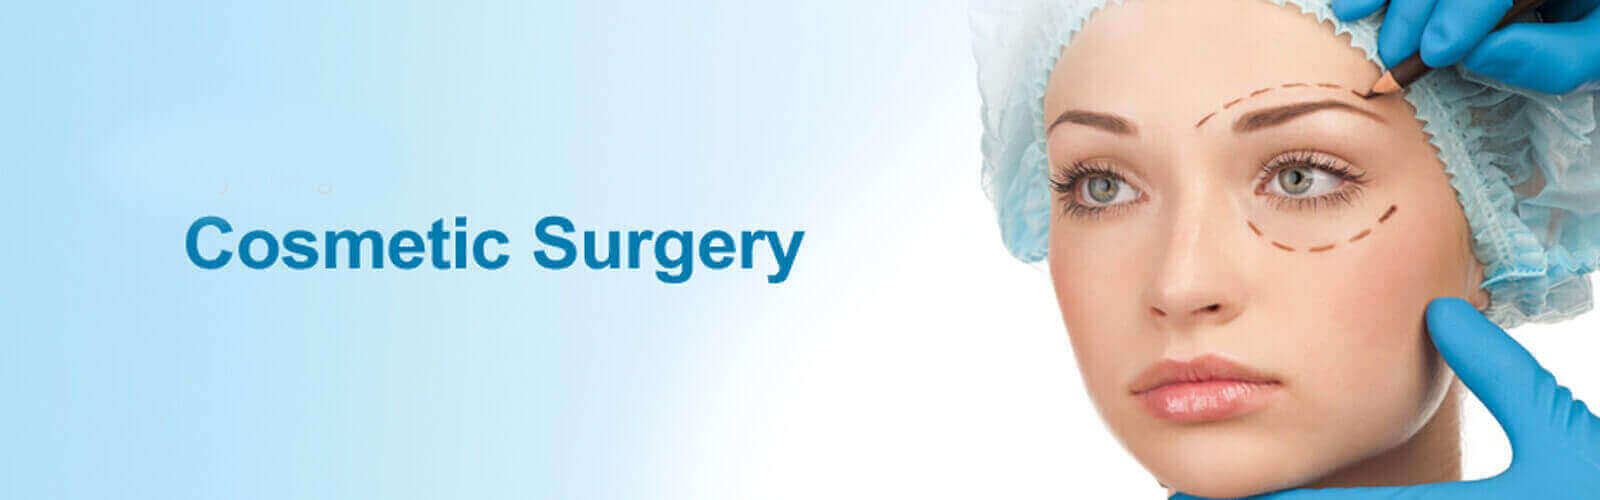 Cosmetic Surgery in Portland